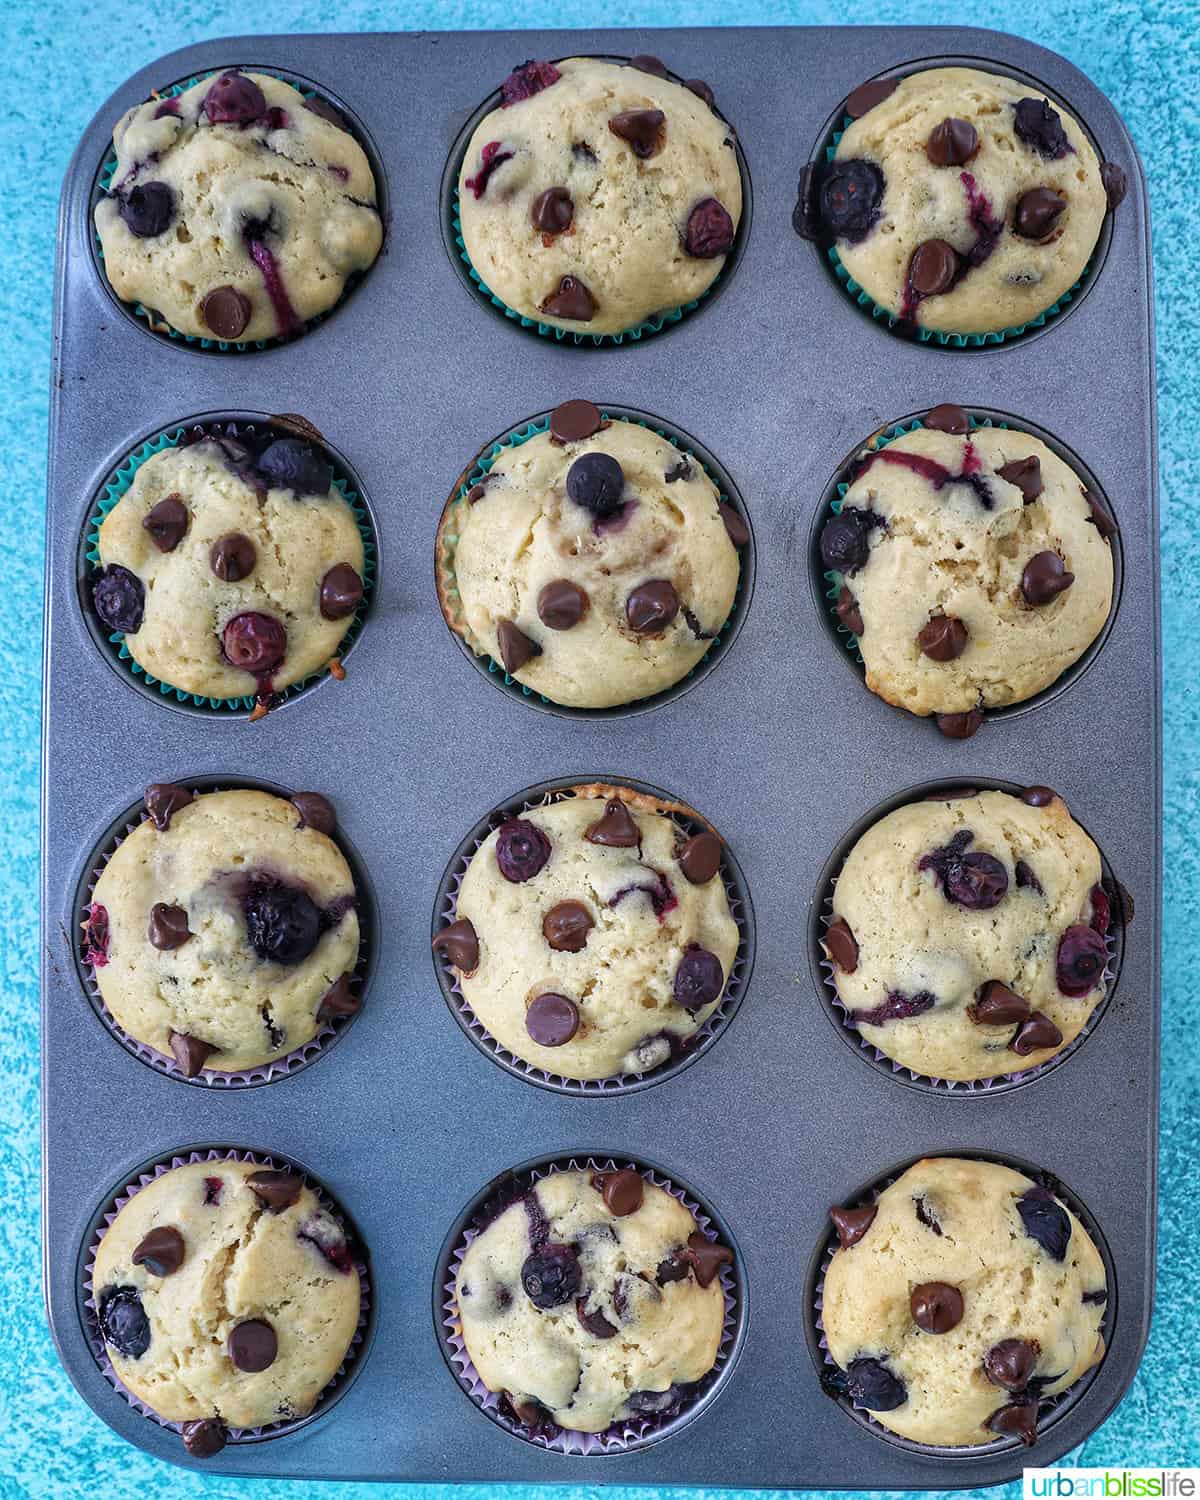 baked several blueberry chocolate chip muffins in a muffin tin.